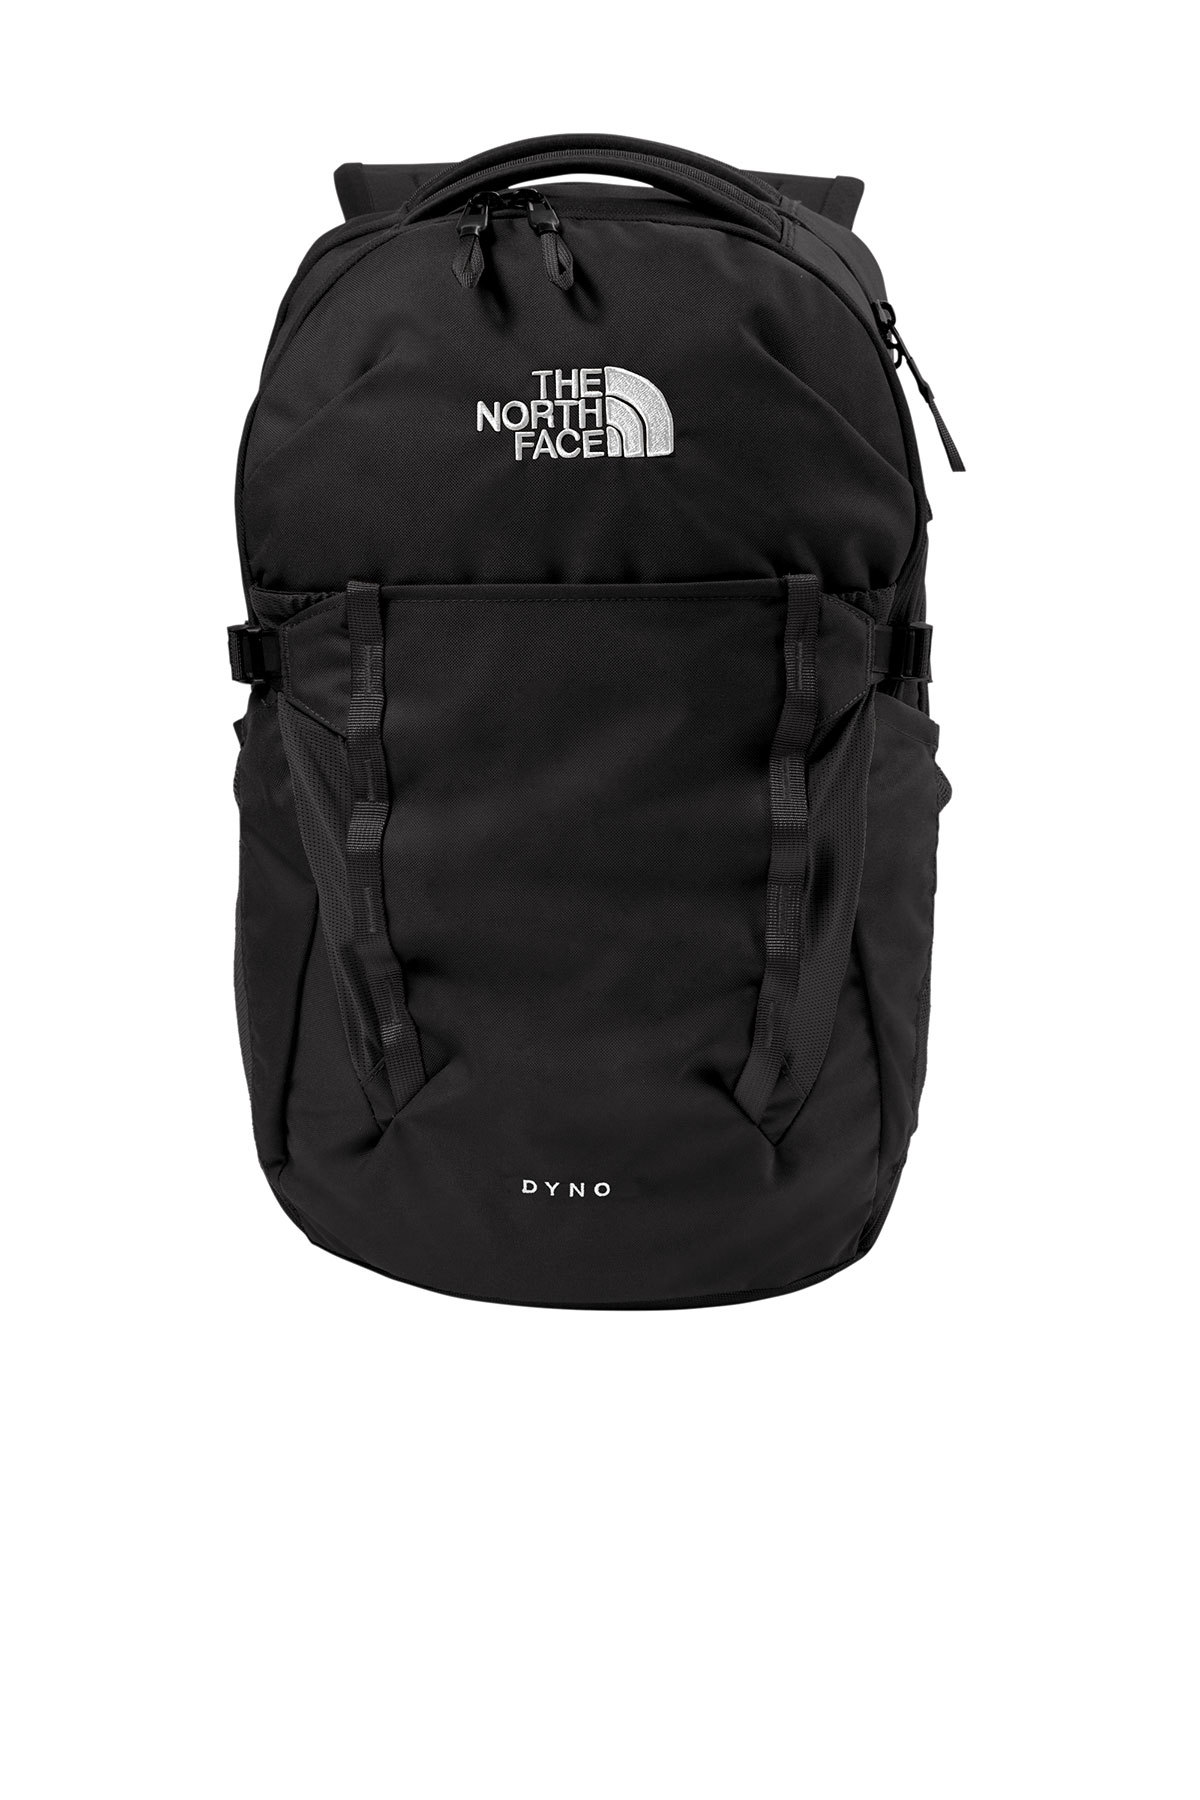 north face front loading backpack